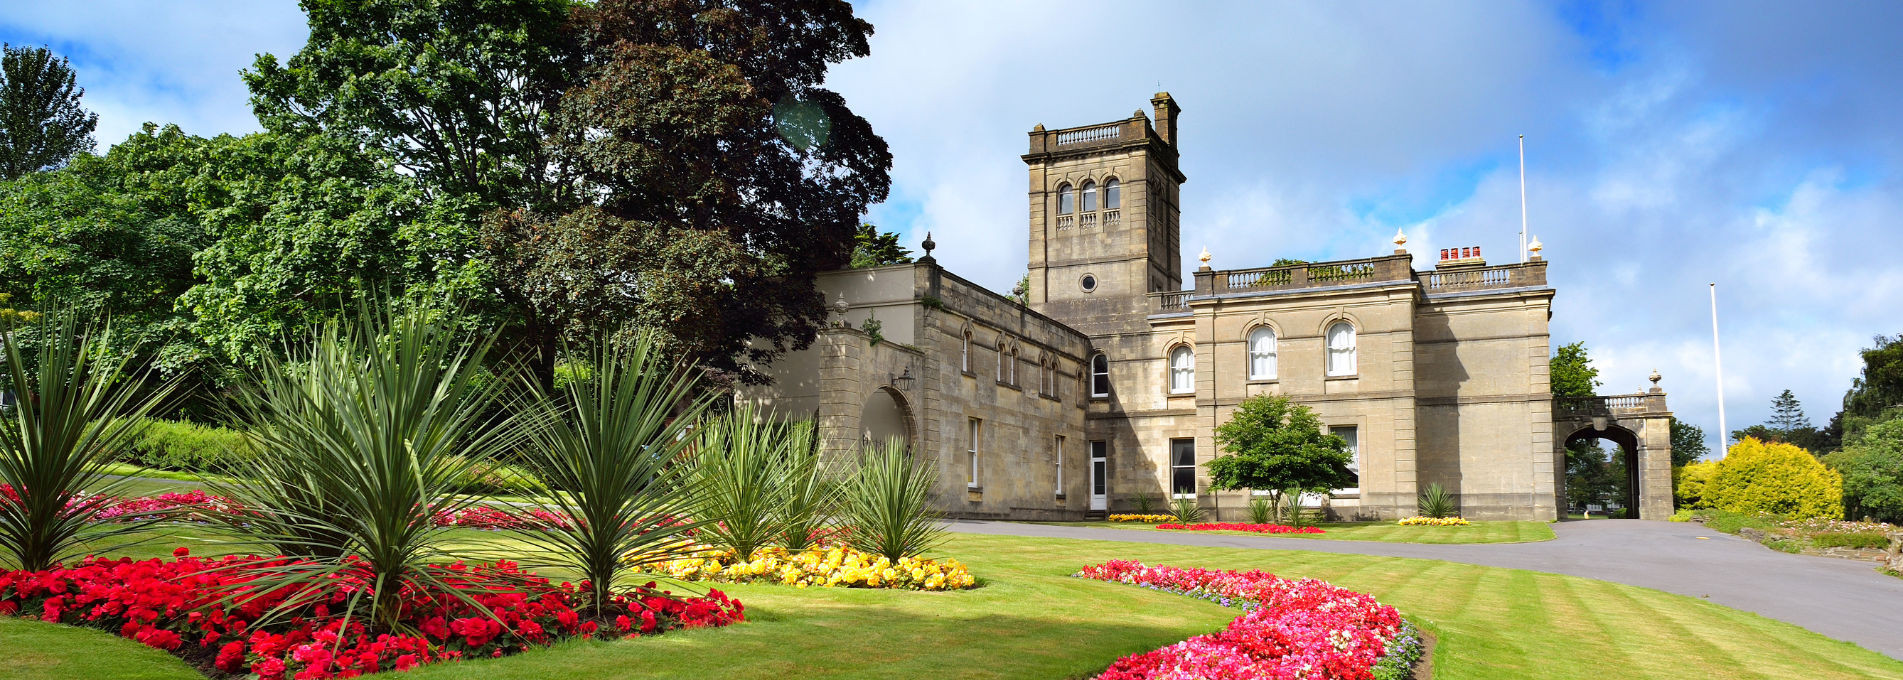 Parc Howard Museum in the summer with flowers in the foreground